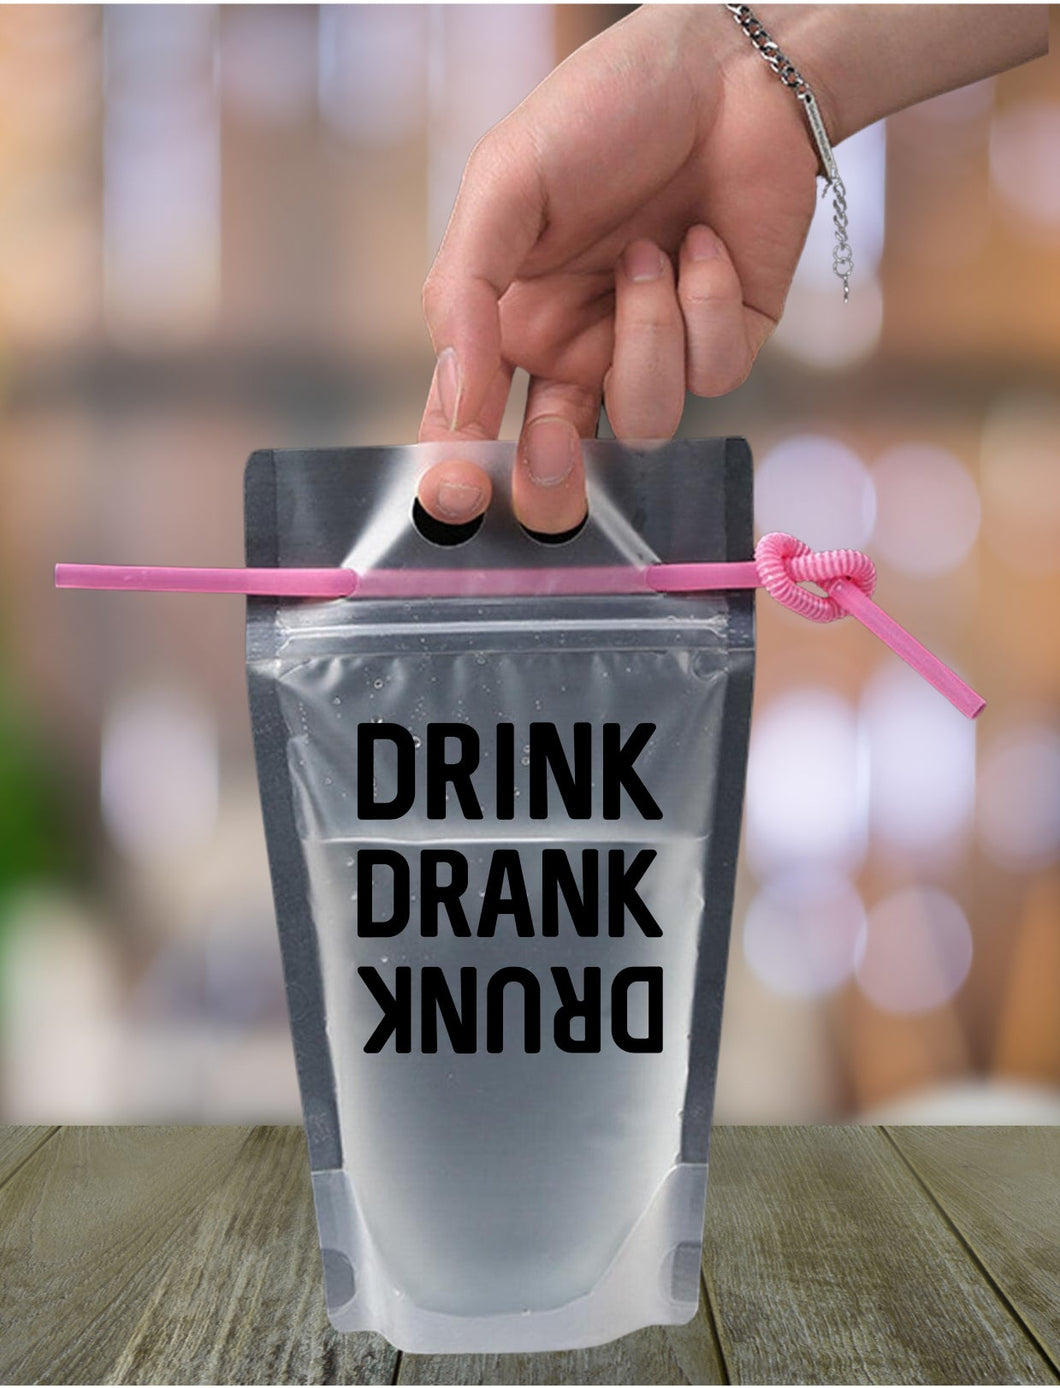 Adult Drink Pouch Drink Drank Drunk